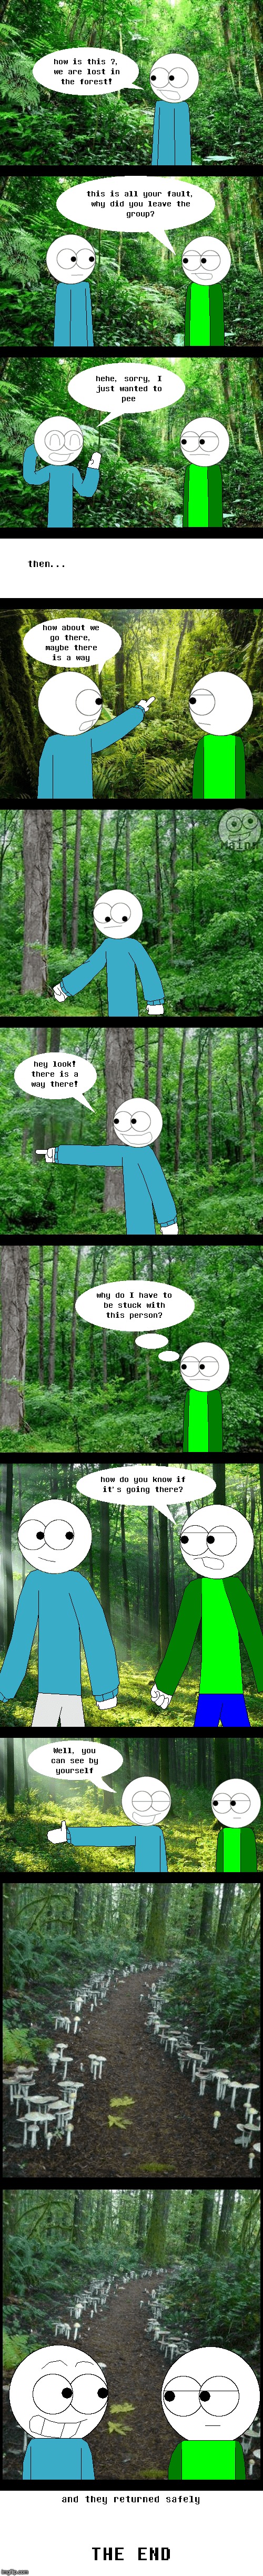 Get Lost In Jungle | image tagged in neckless,comics/cartoons,jungle | made w/ Imgflip meme maker